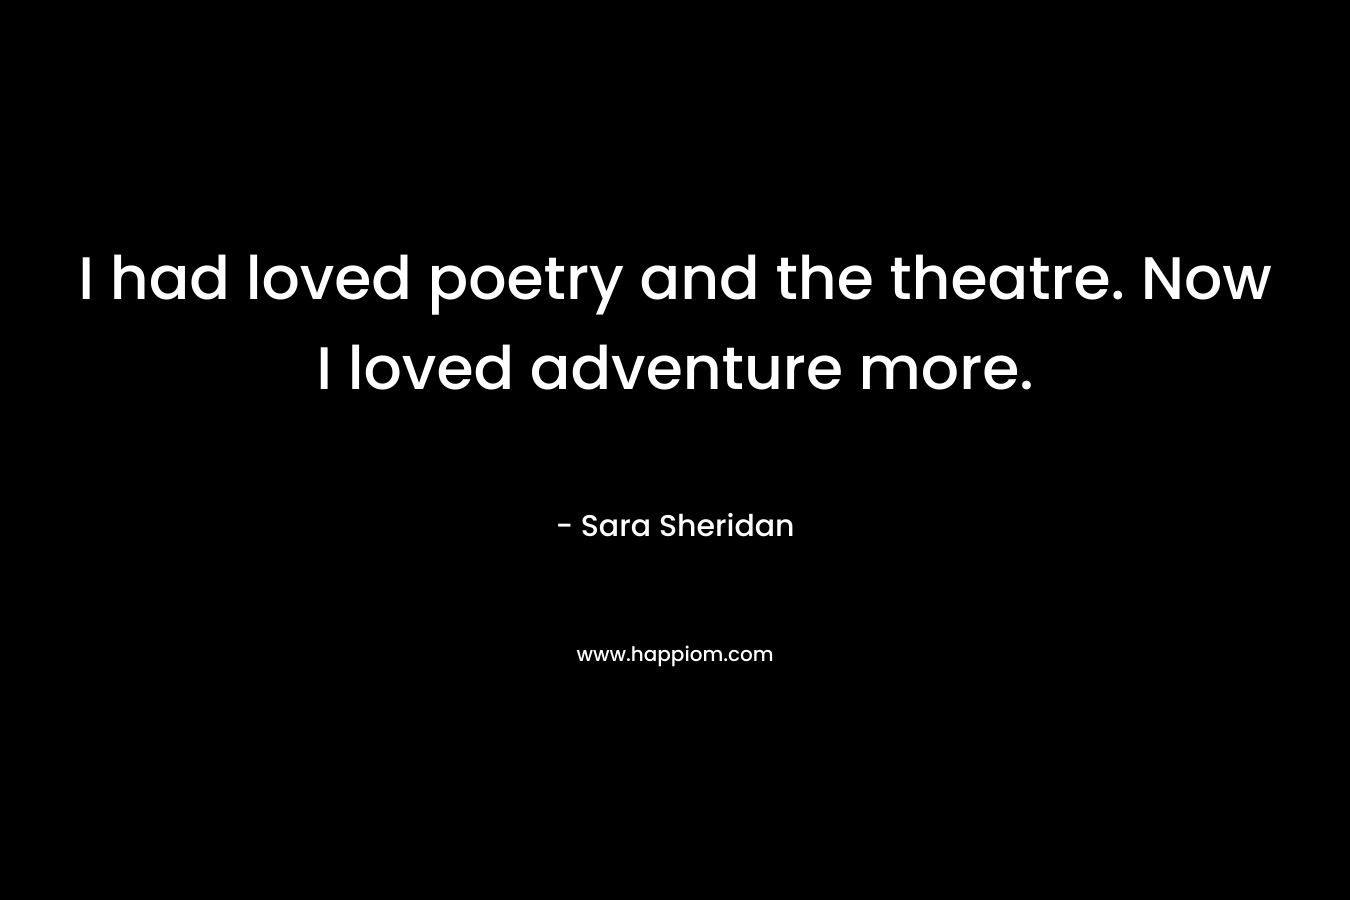 I had loved poetry and the theatre. Now I loved adventure more. – Sara Sheridan